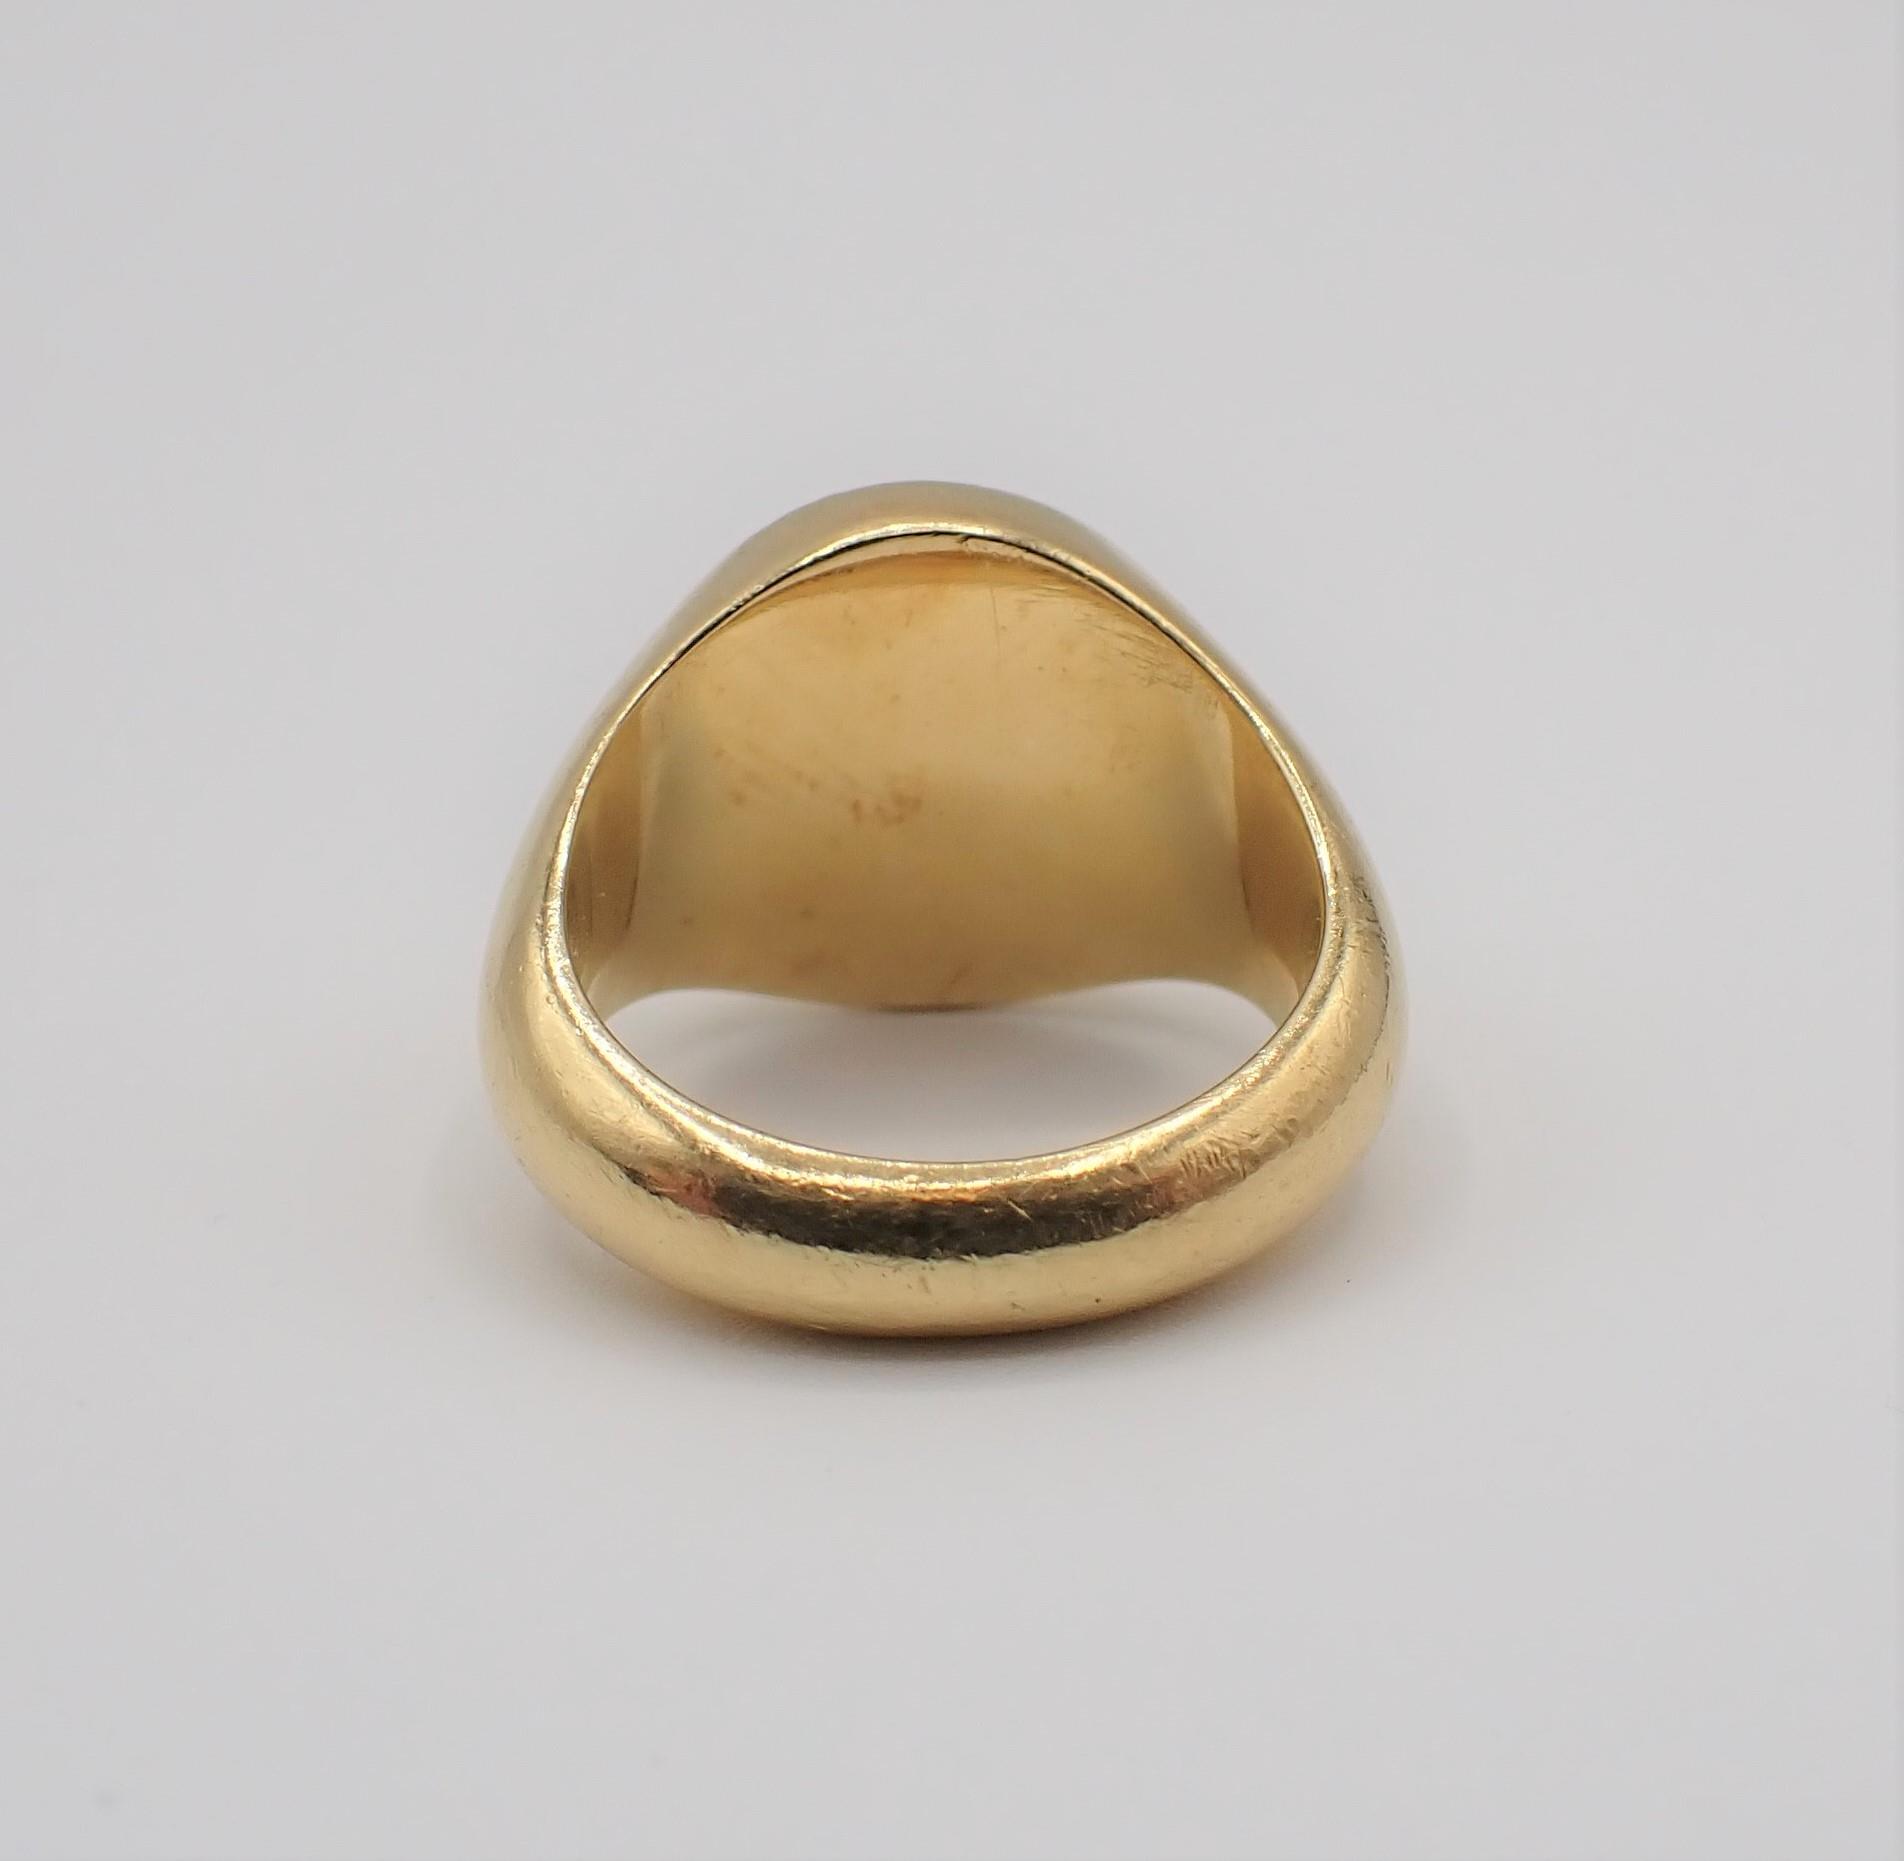 An 18ct gold Signet Ring approx 12.50gms, ring size E 1/2 to F - Image 2 of 3